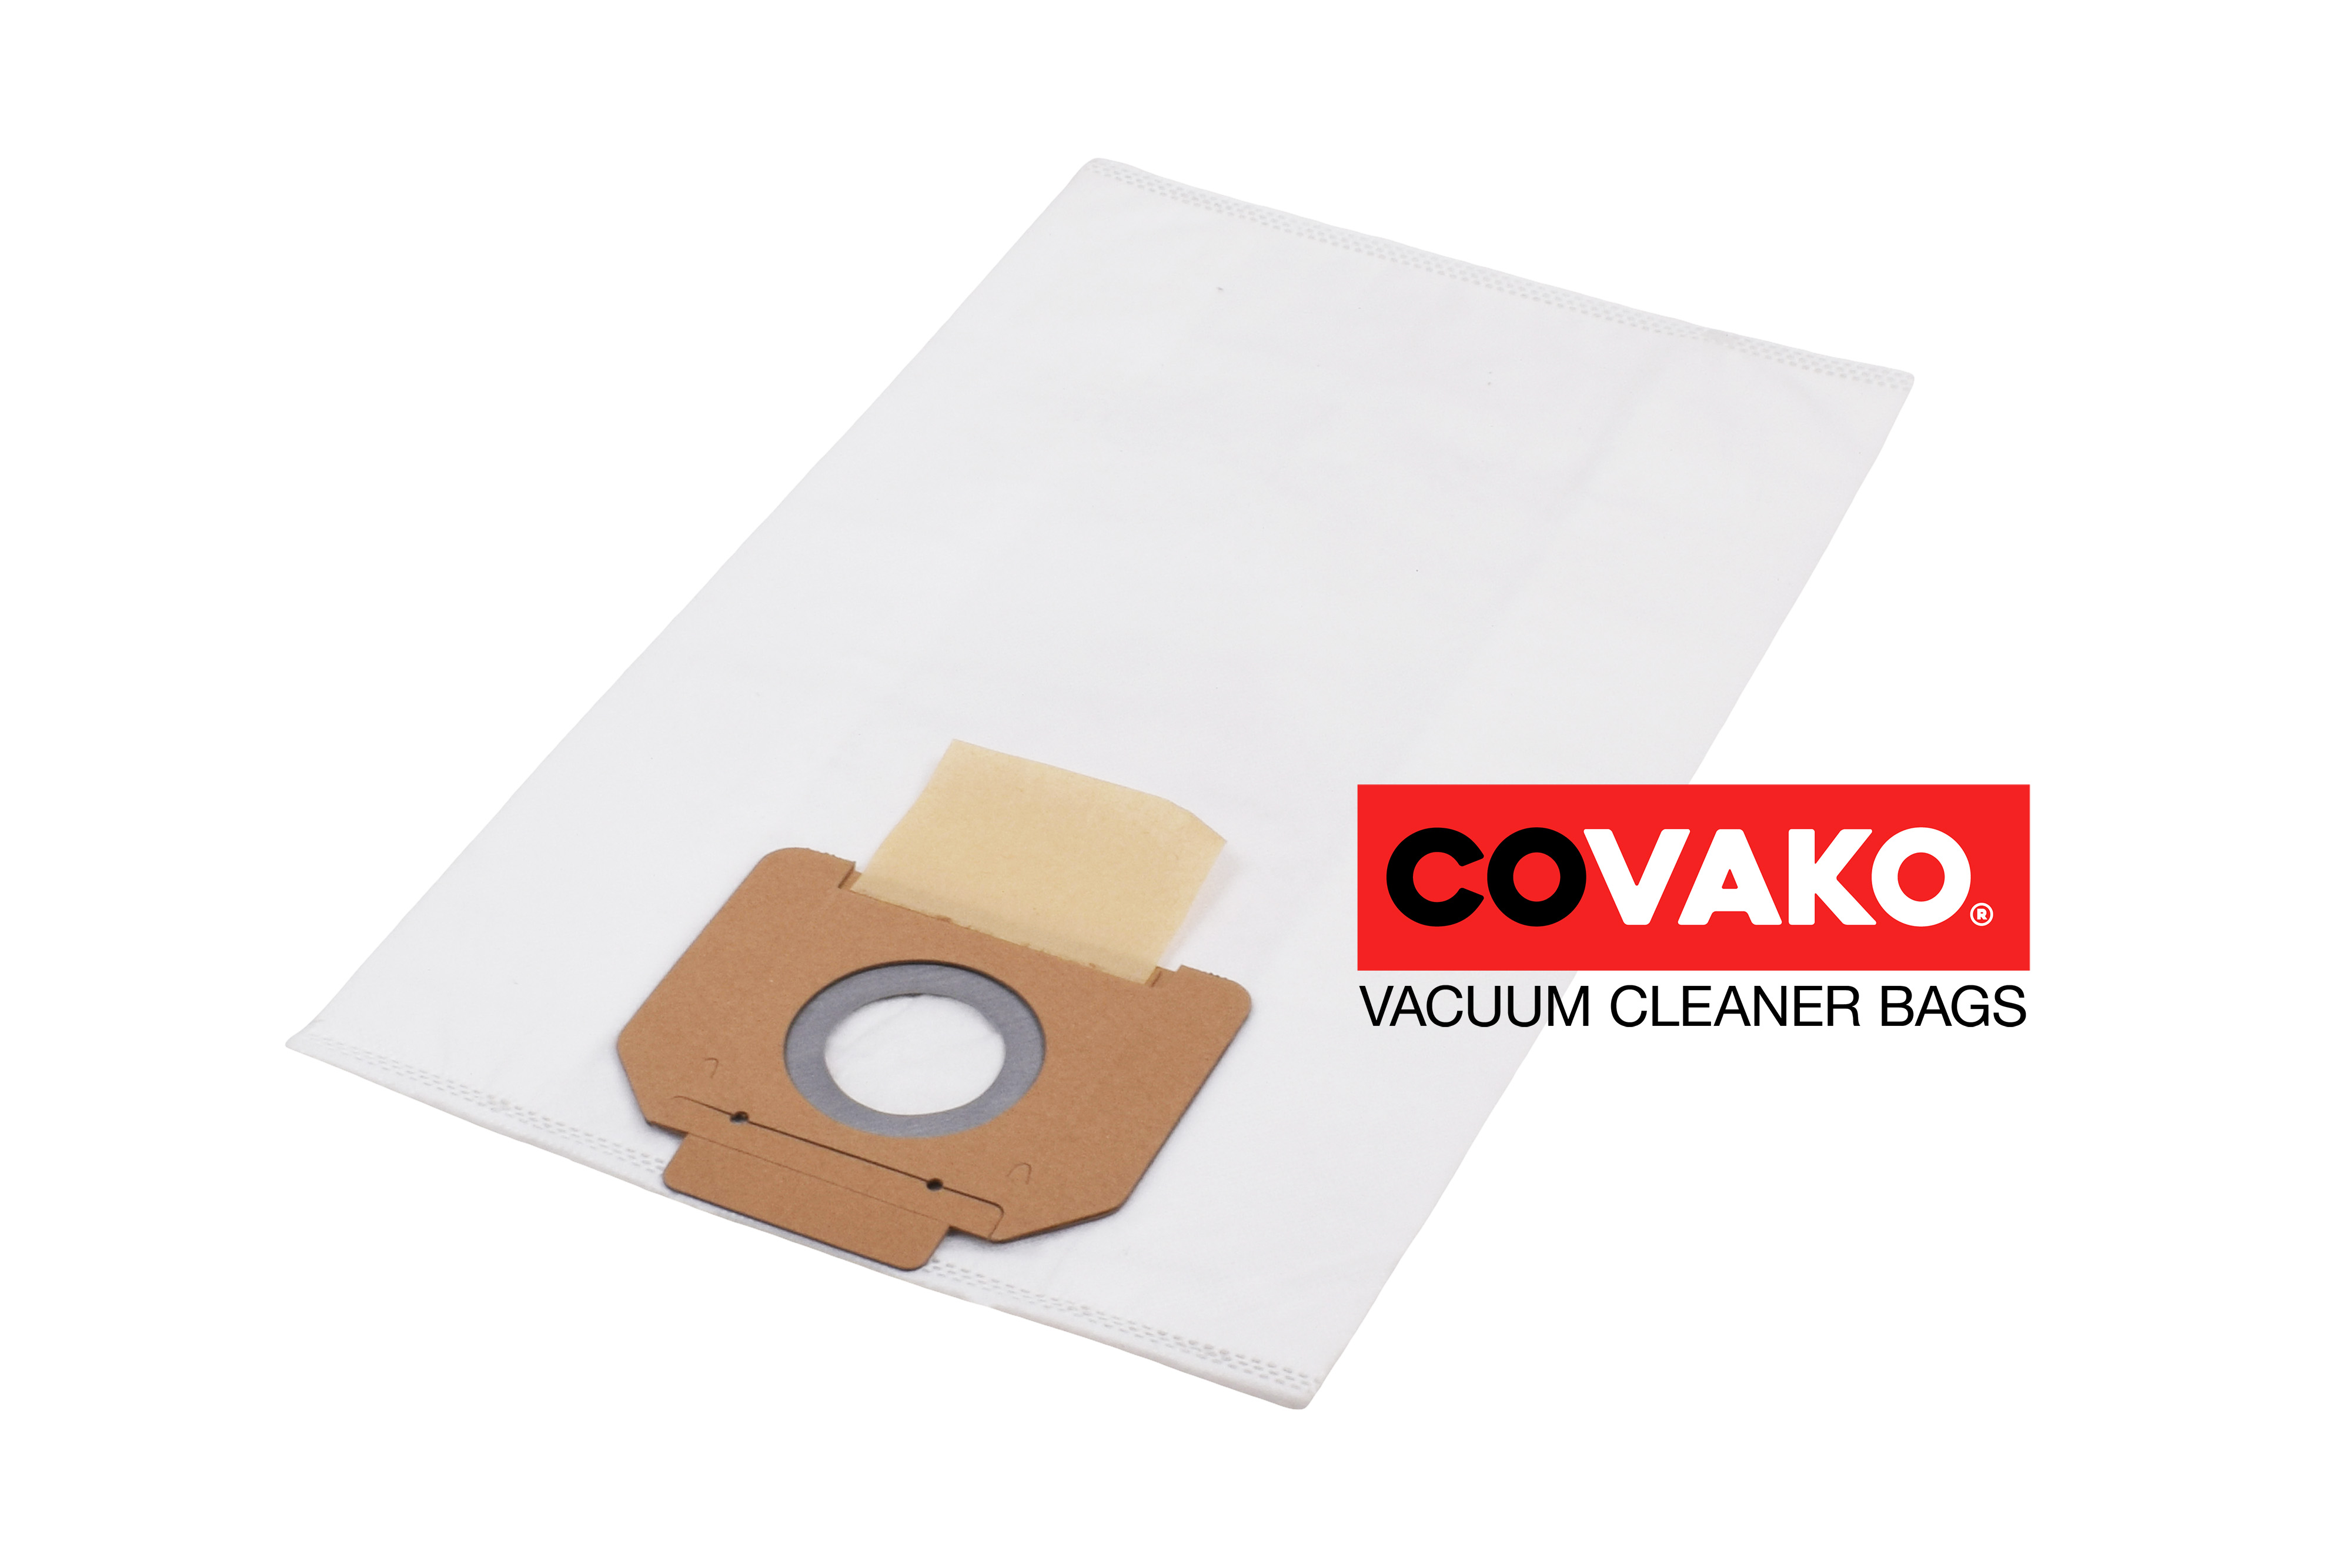 ICA GP 1/16 ECO A / Synthesis - ICA vacuum cleaner bags